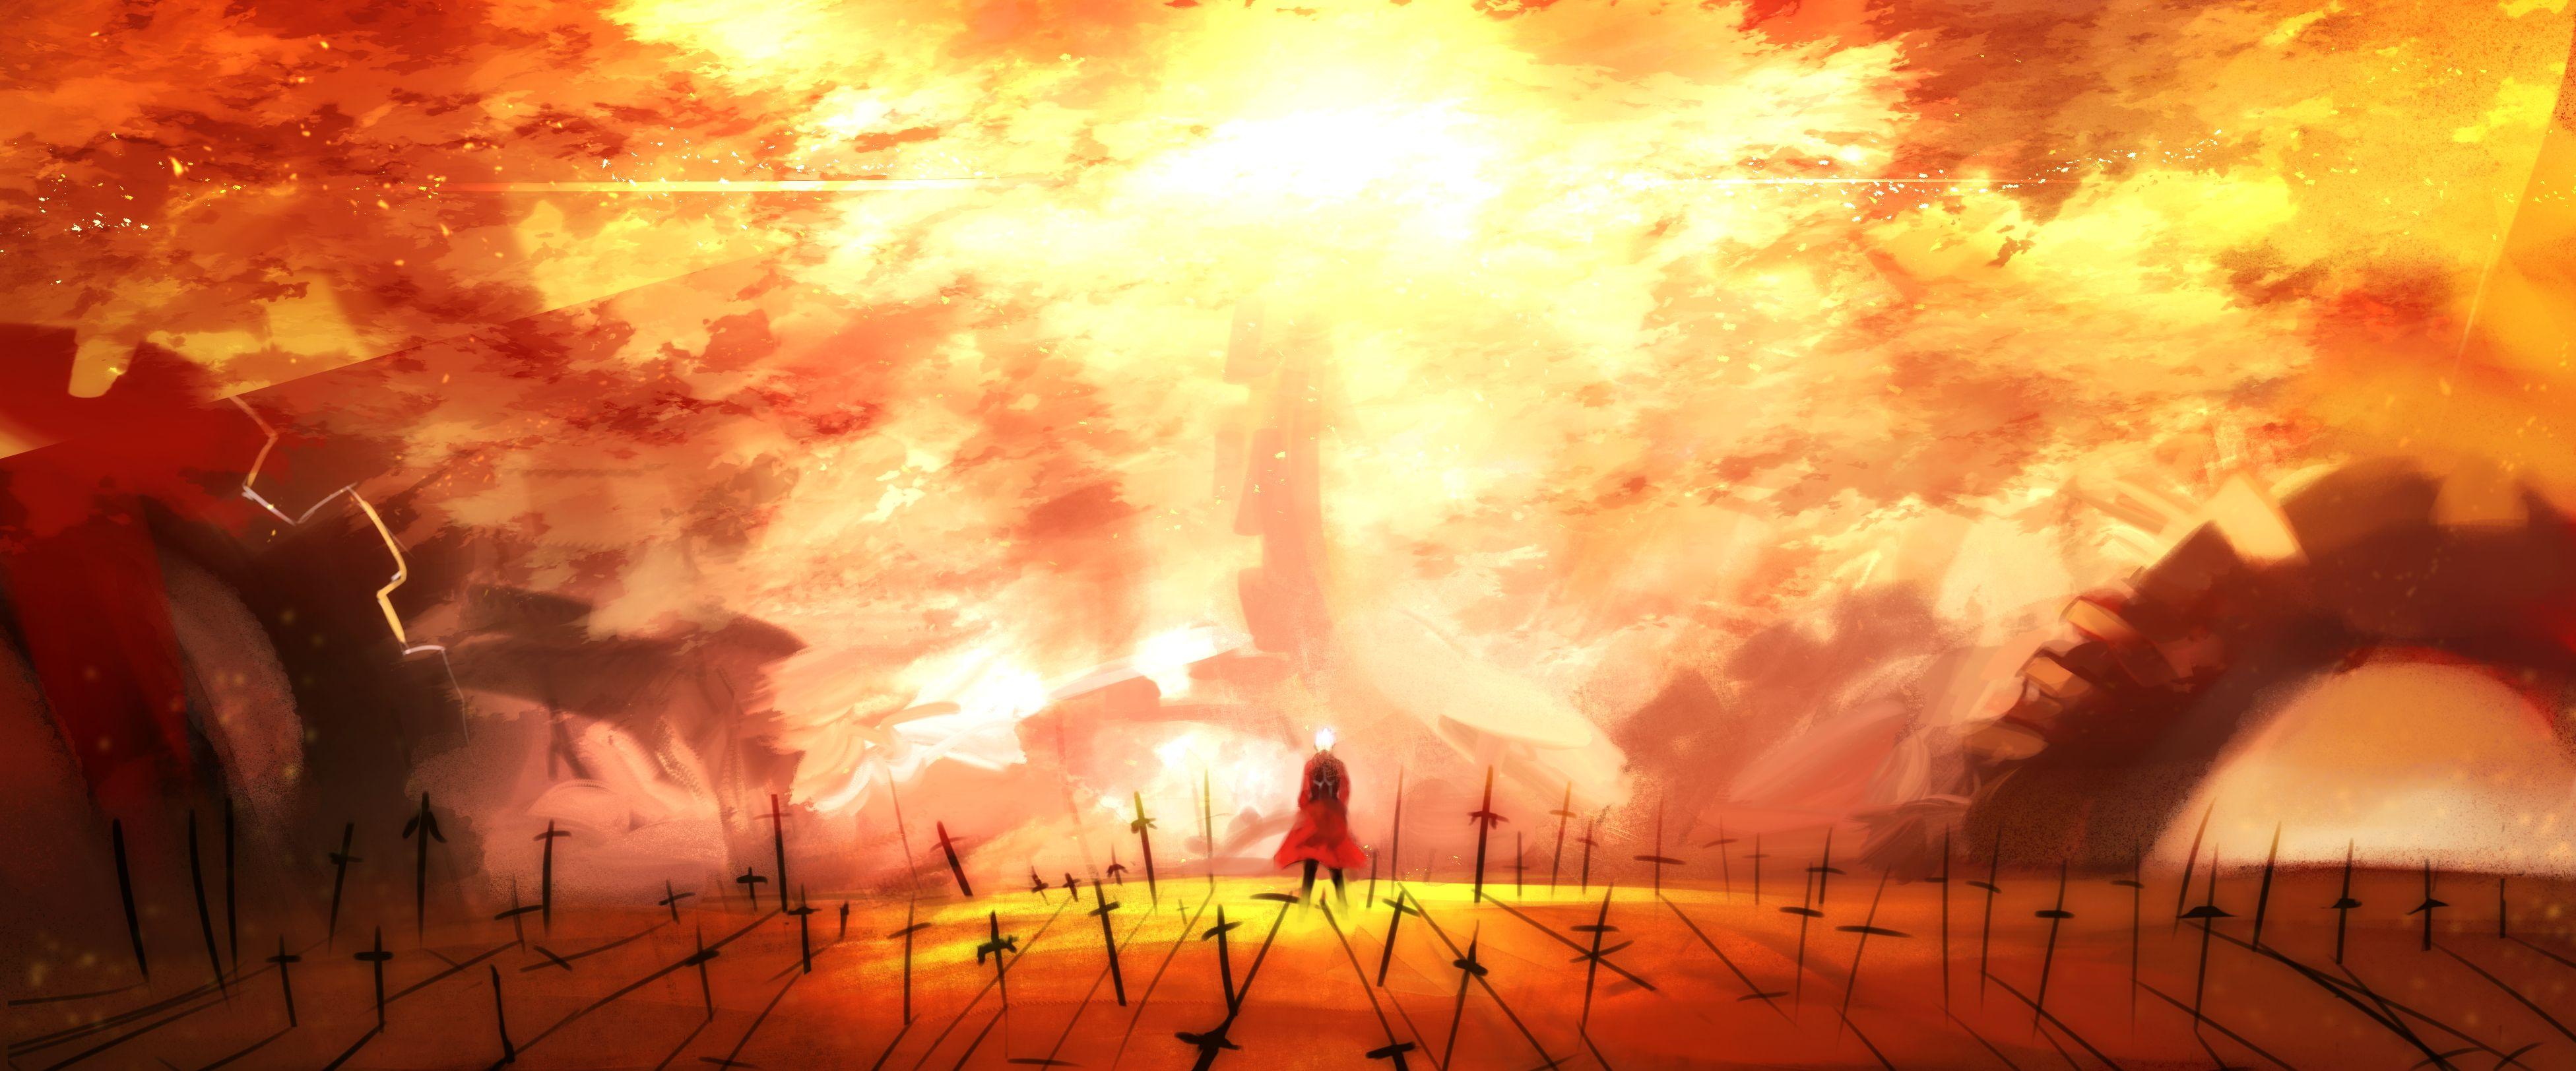 Anime Explosion Wallpapers - Top Free Anime Explosion Backgrounds